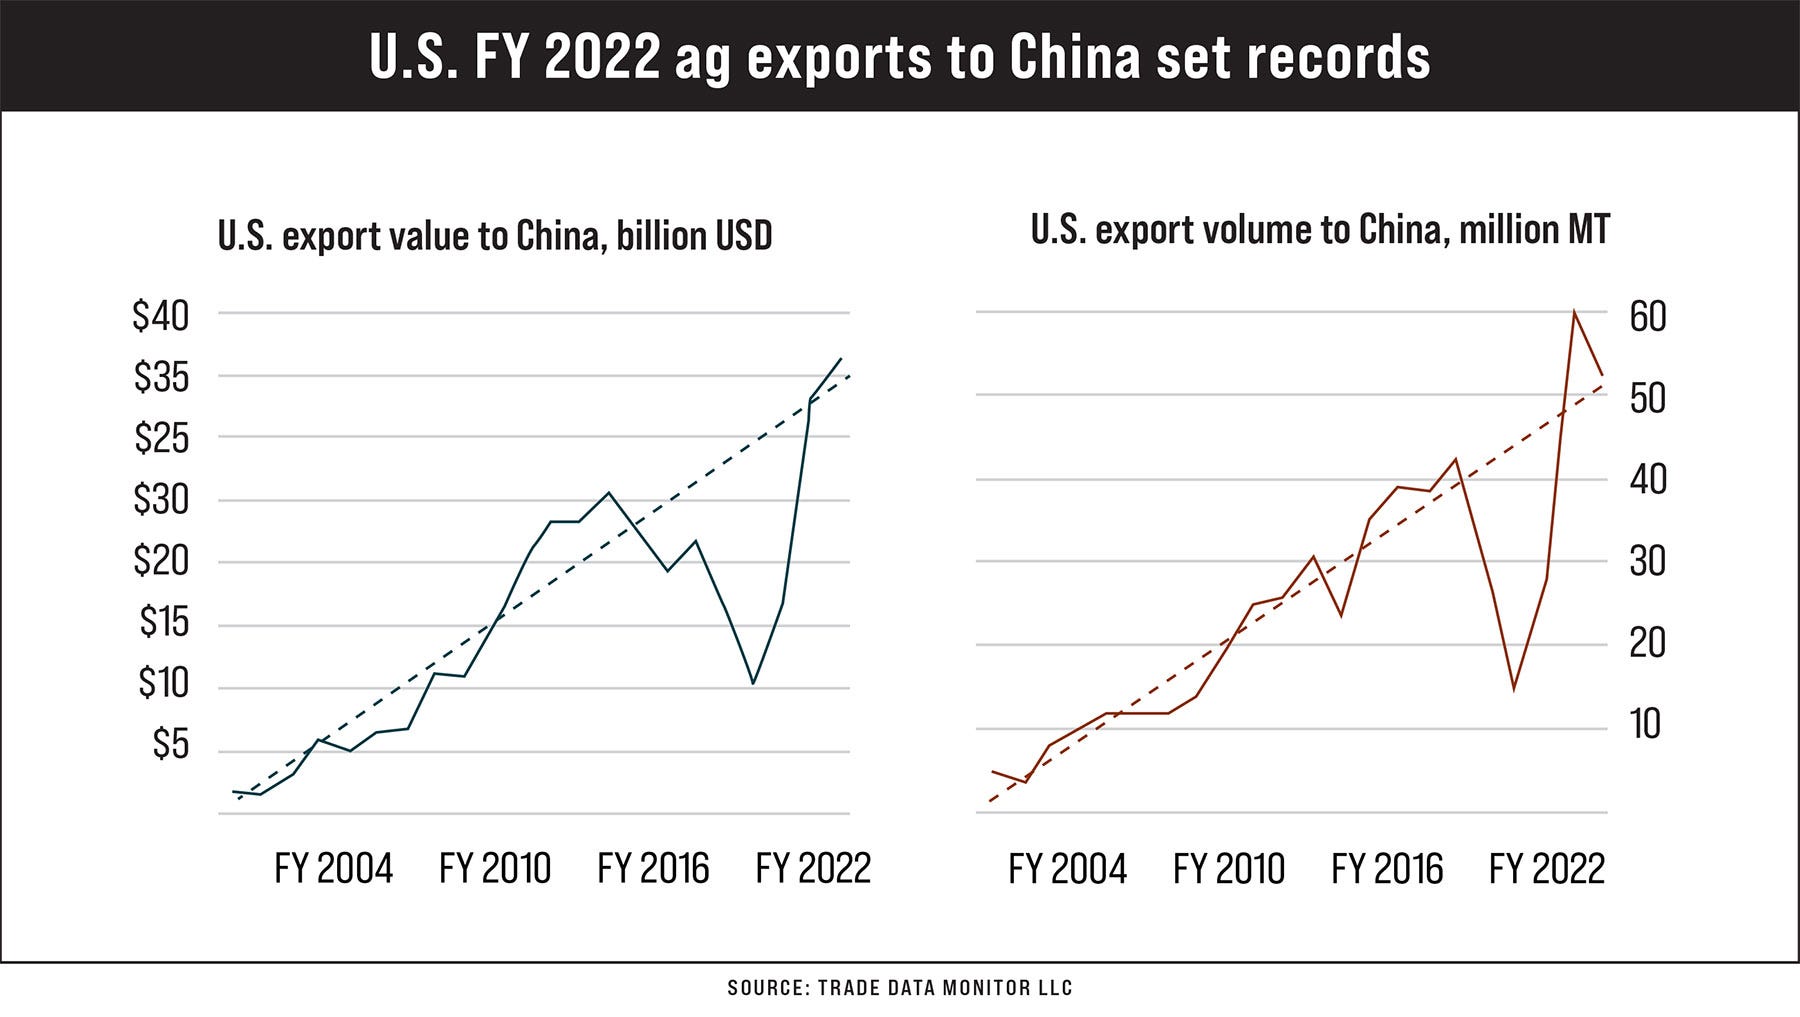 2 charts showing U.S. FY 2022 ag exports to China